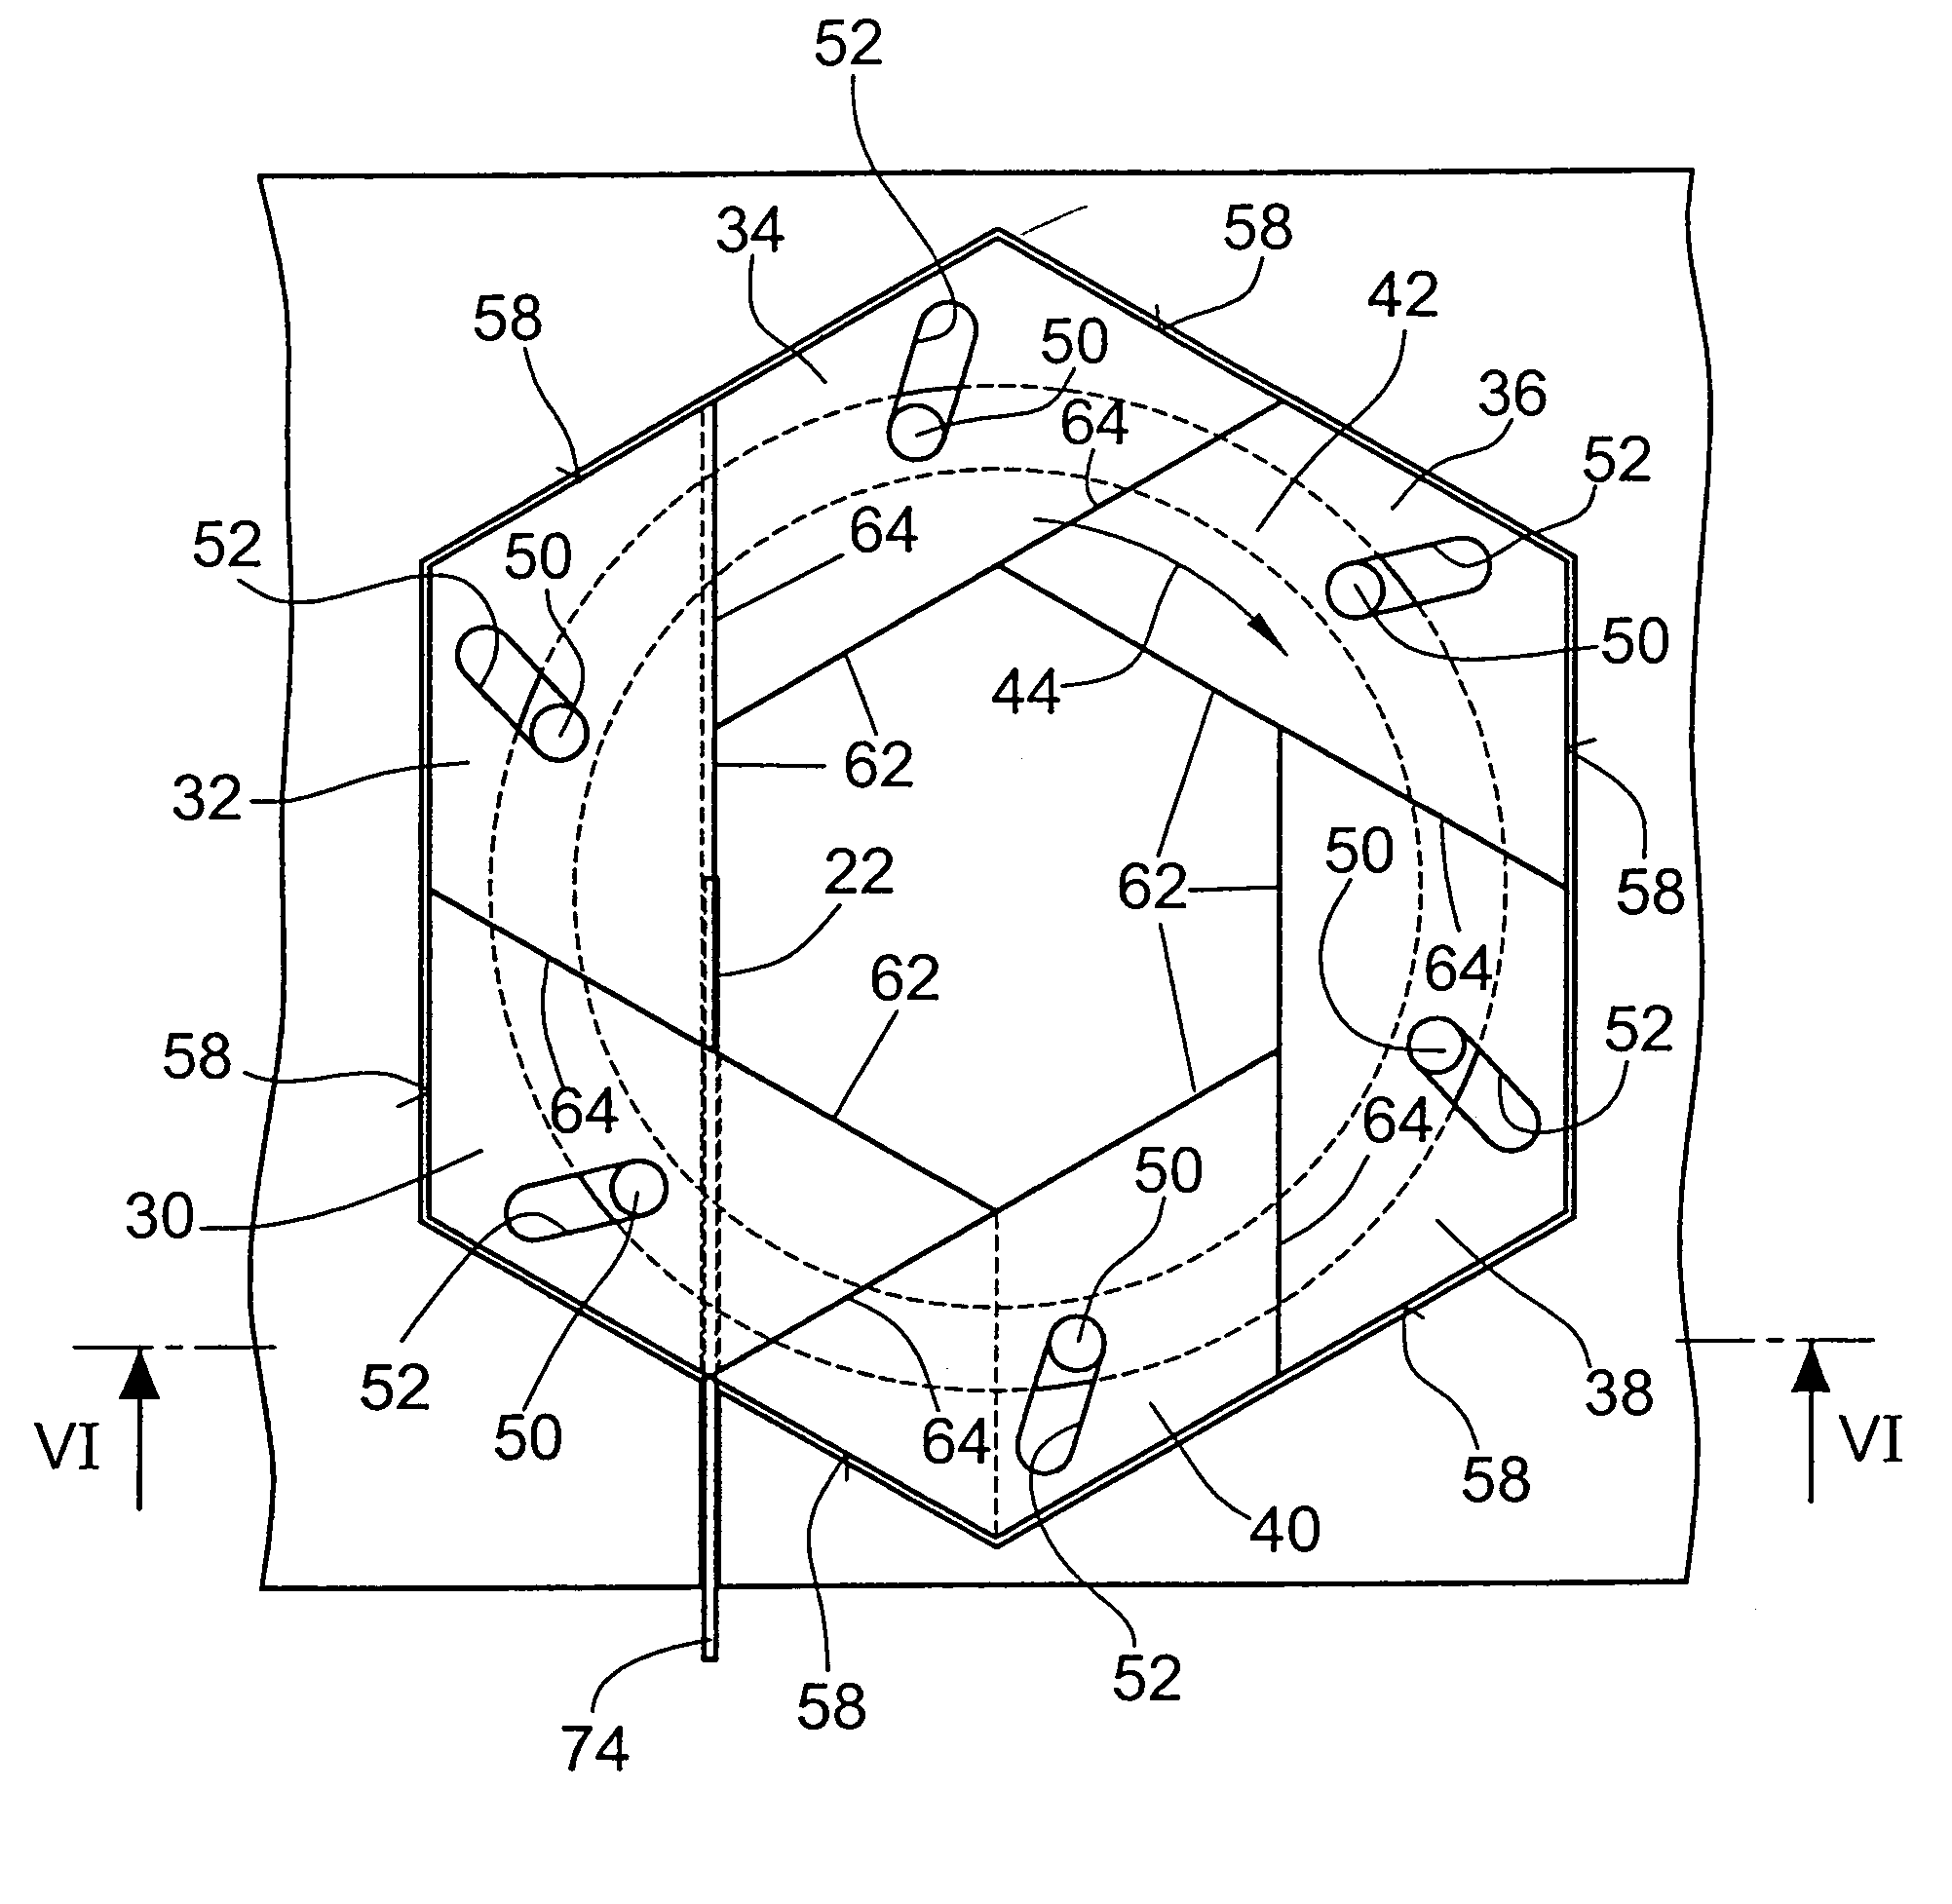 Device and method for producing tubular packs that are filled with a product